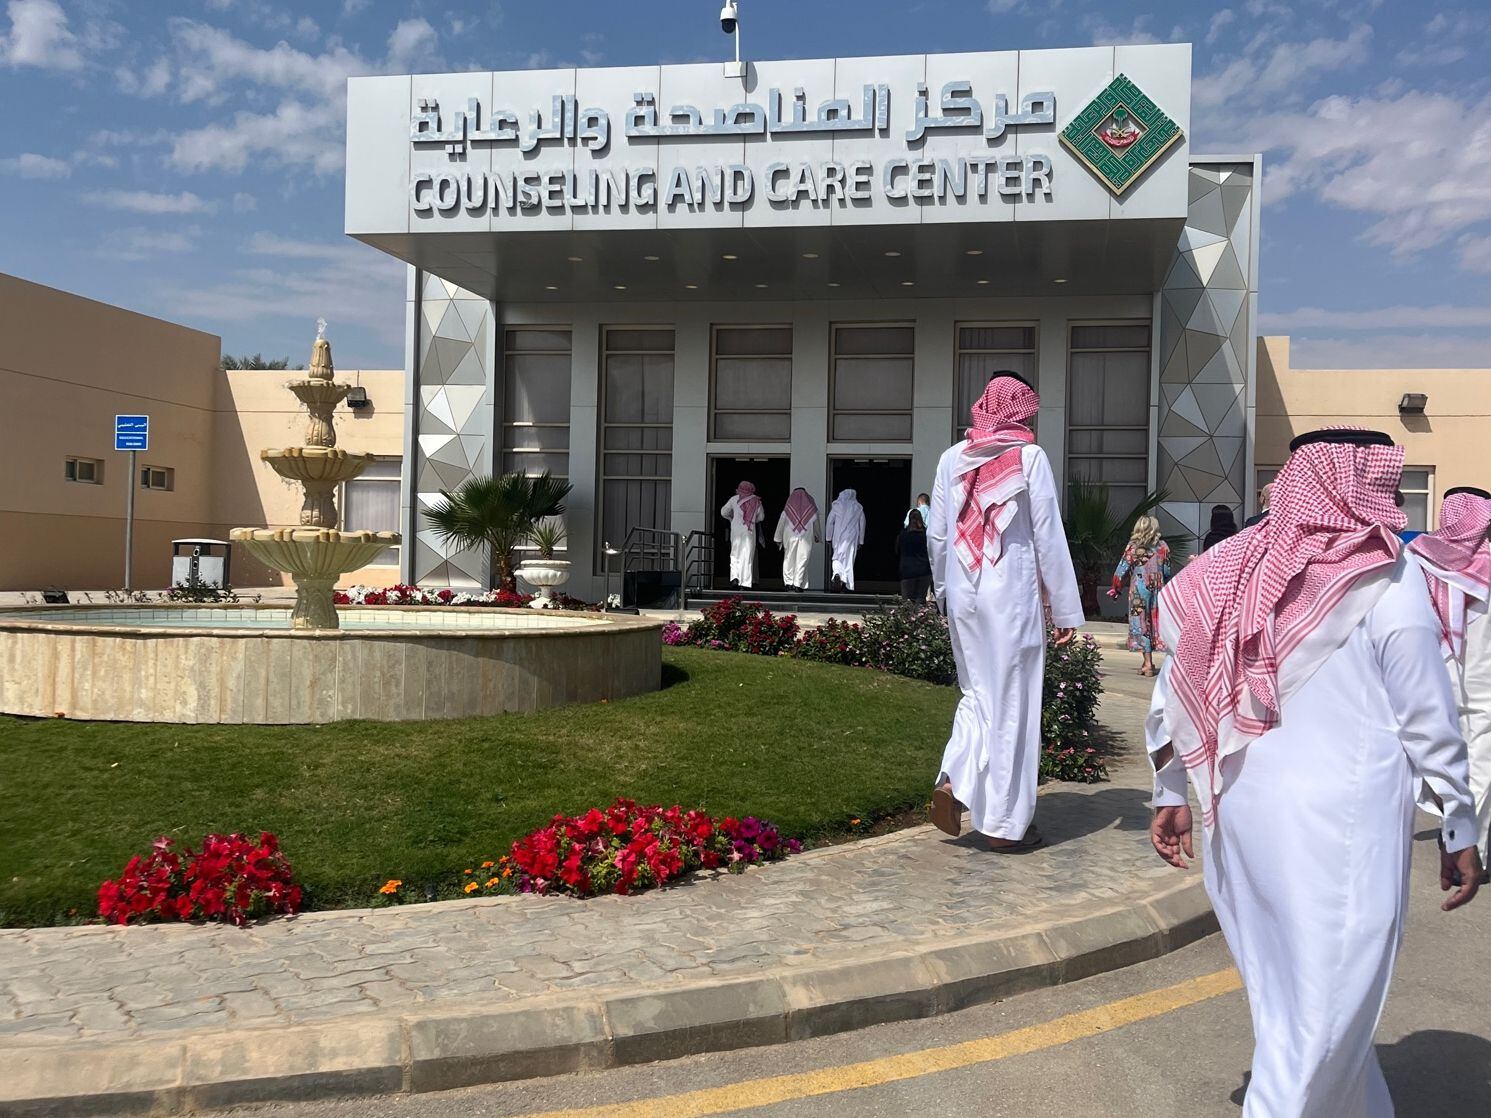 The Mohammed bin Nayef Center for Counseling and Care in Saudi Arabia seeks to "deprogram"...